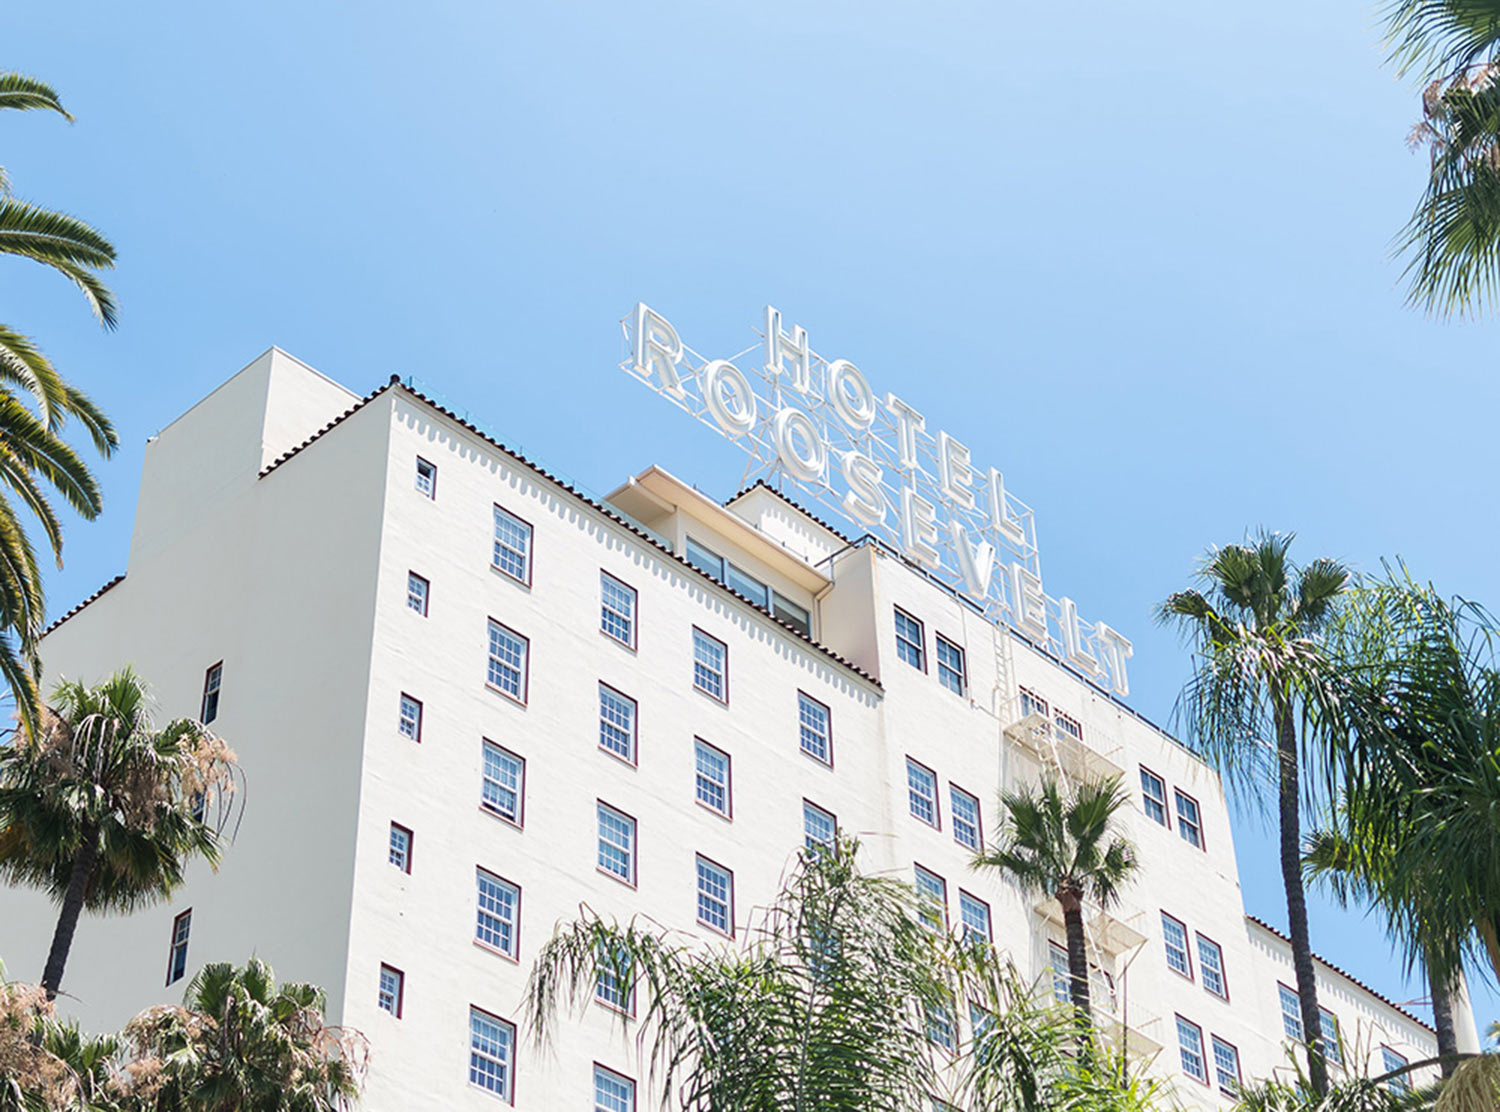 The Roosevelt stands on the iconic Hollywood Bvld